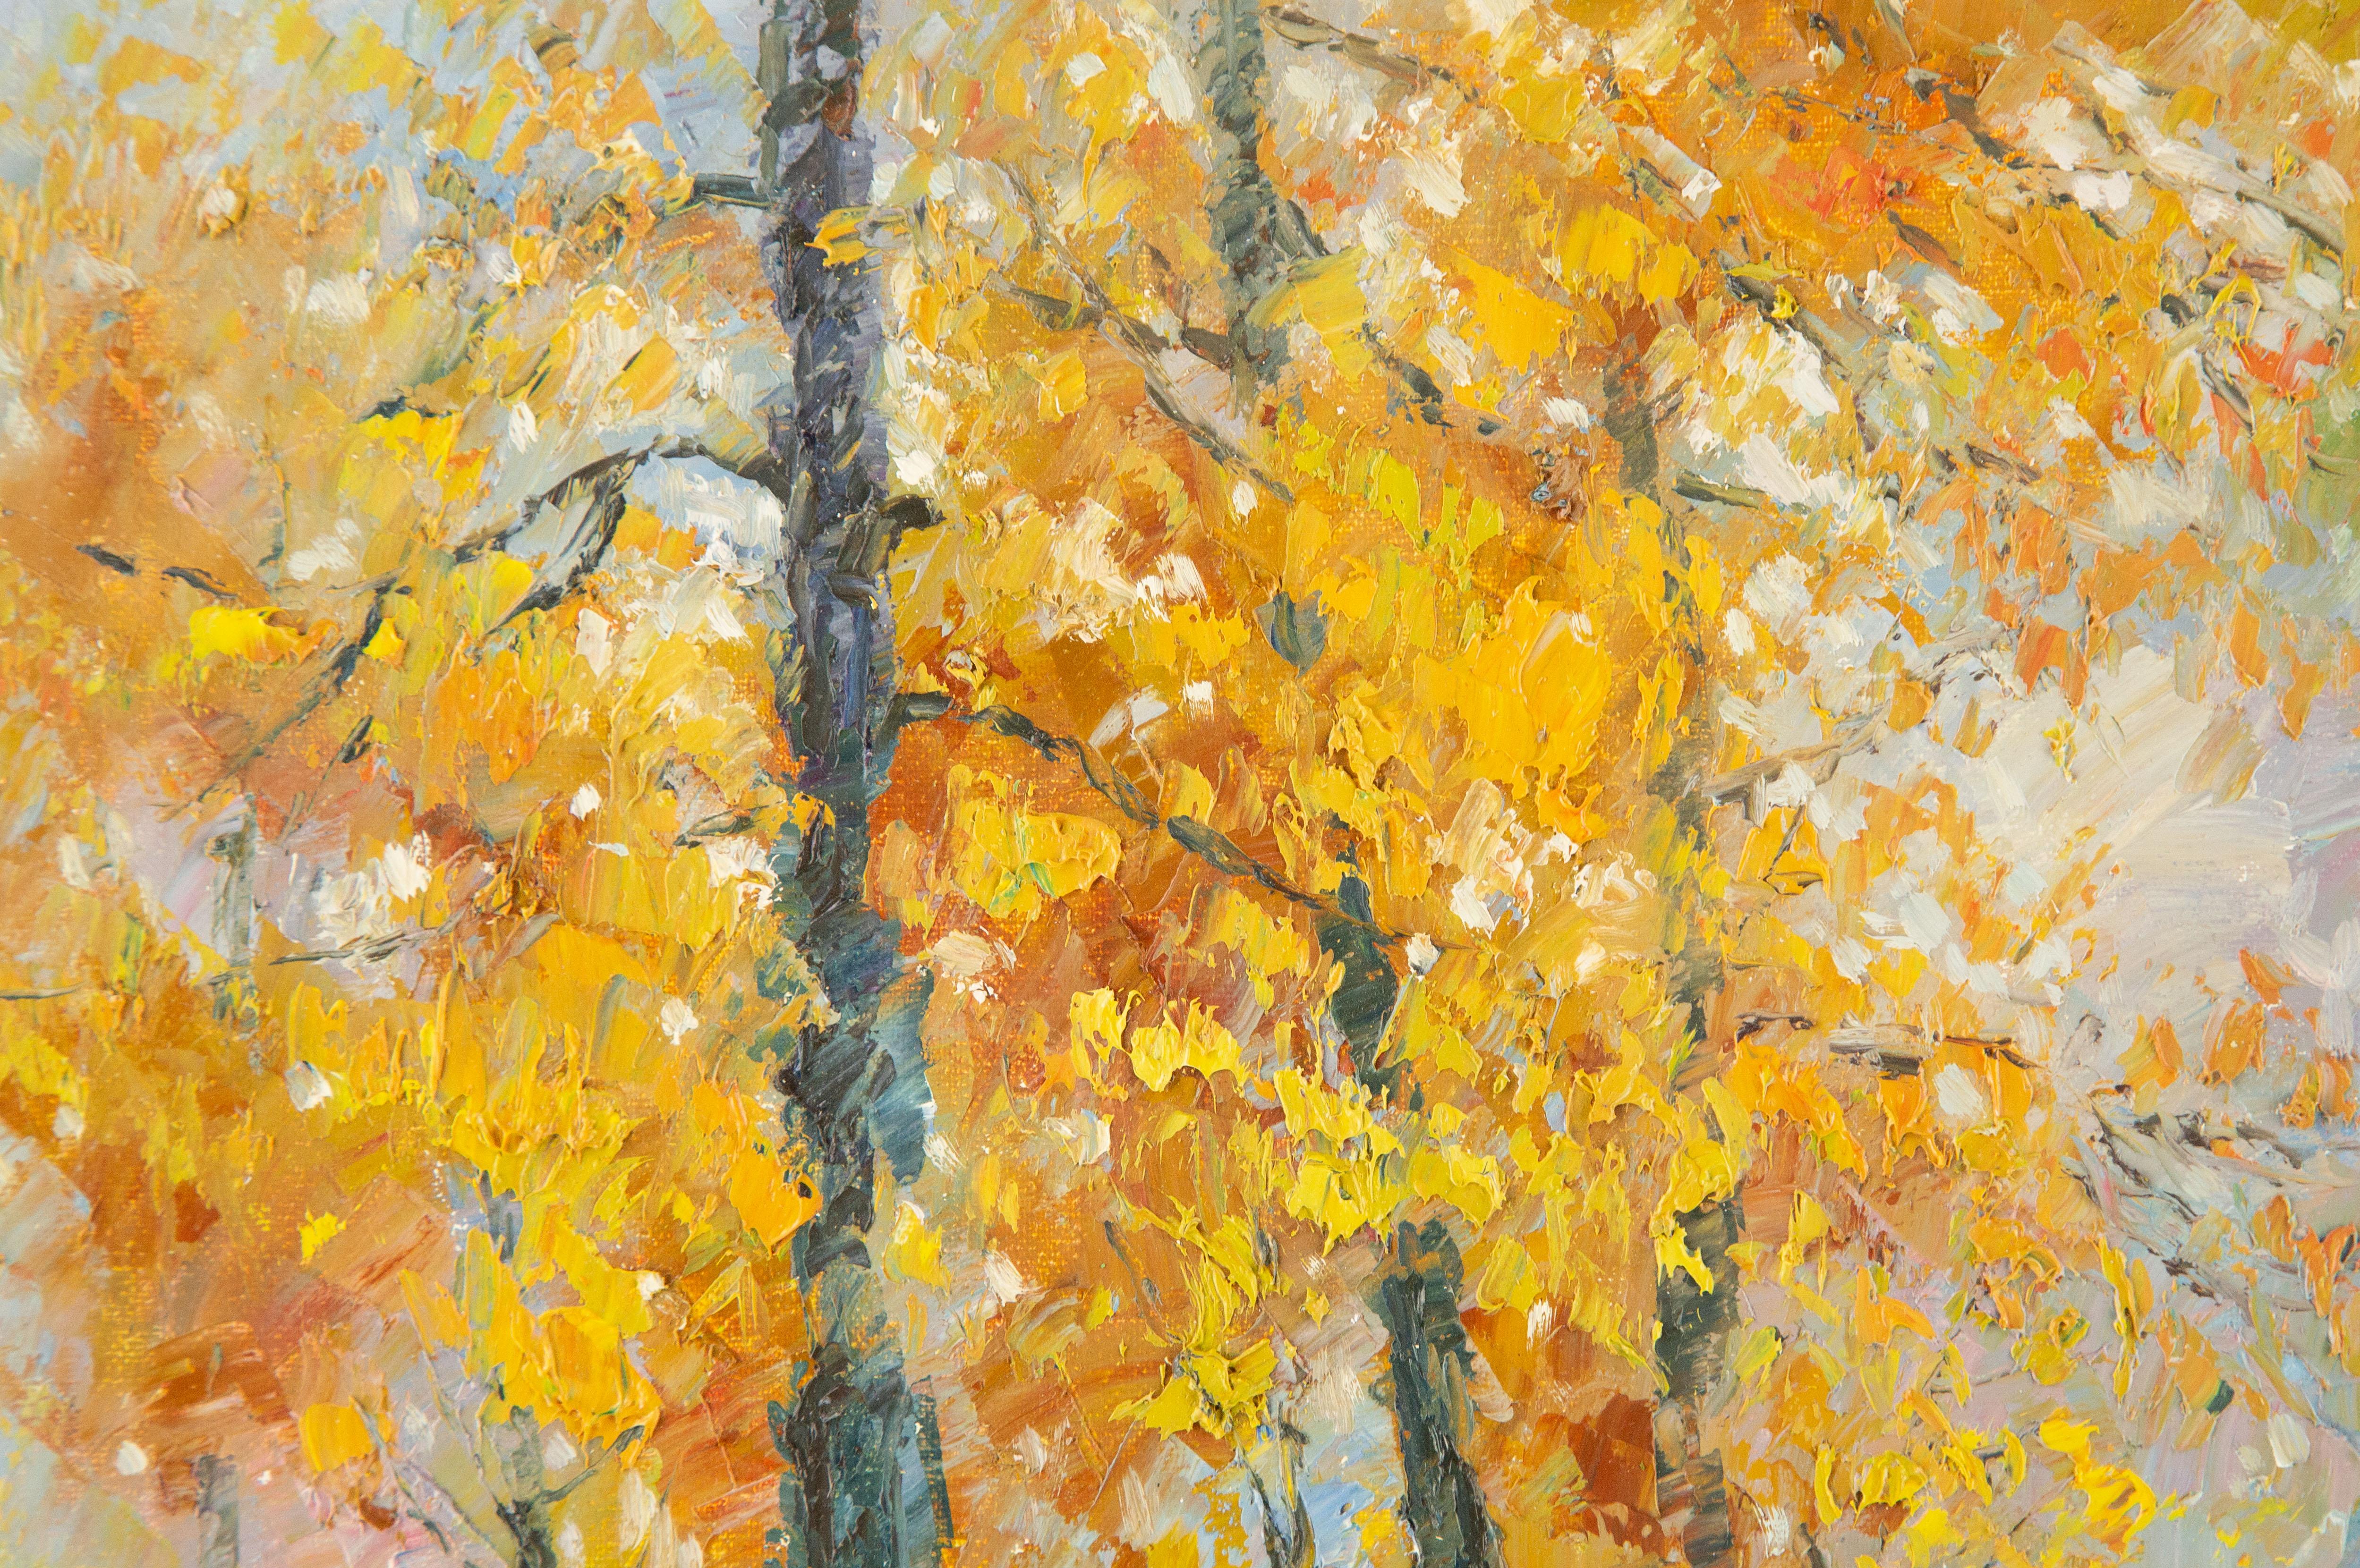  Title: Autumn View
 Medium: Oil on canvas
 Size: 15.25 x 19.25 inches
 Frame: Framing options available!
 Condition: The painting appears to be in excellent condition.
 Note: This painting is unstretched
 Year: 2015
 Artist: Jiwei Chen
 Signature: